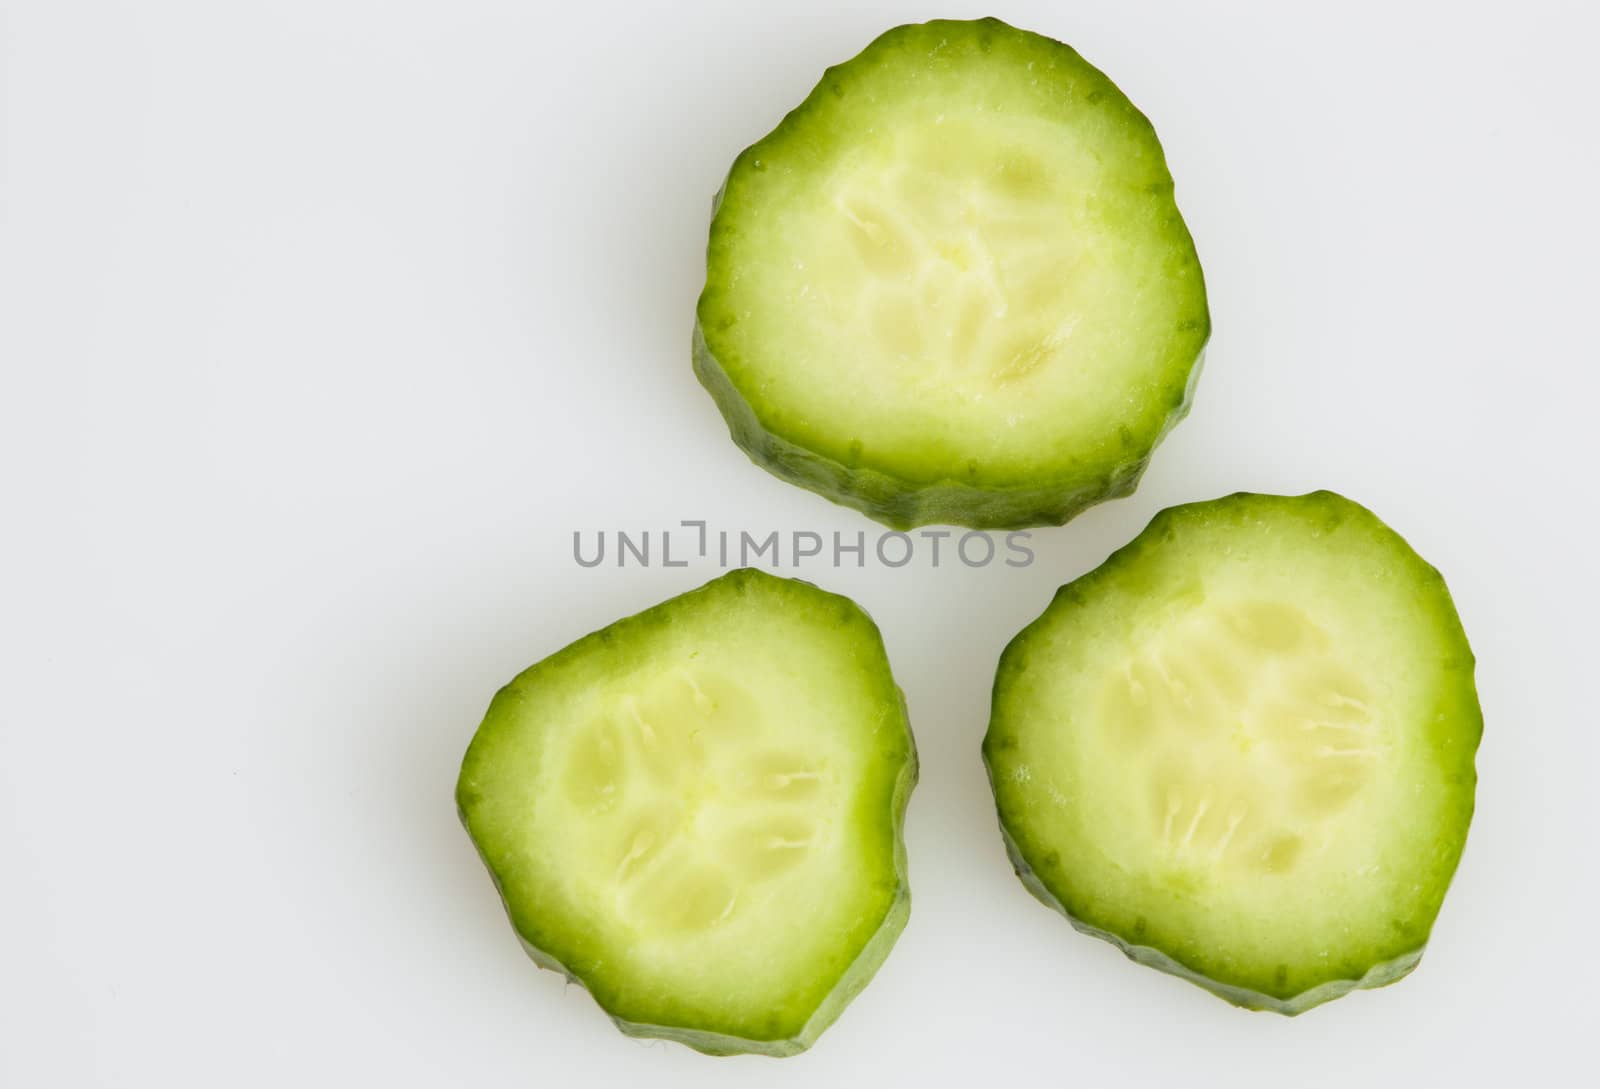 Cucumber close-up on a white background